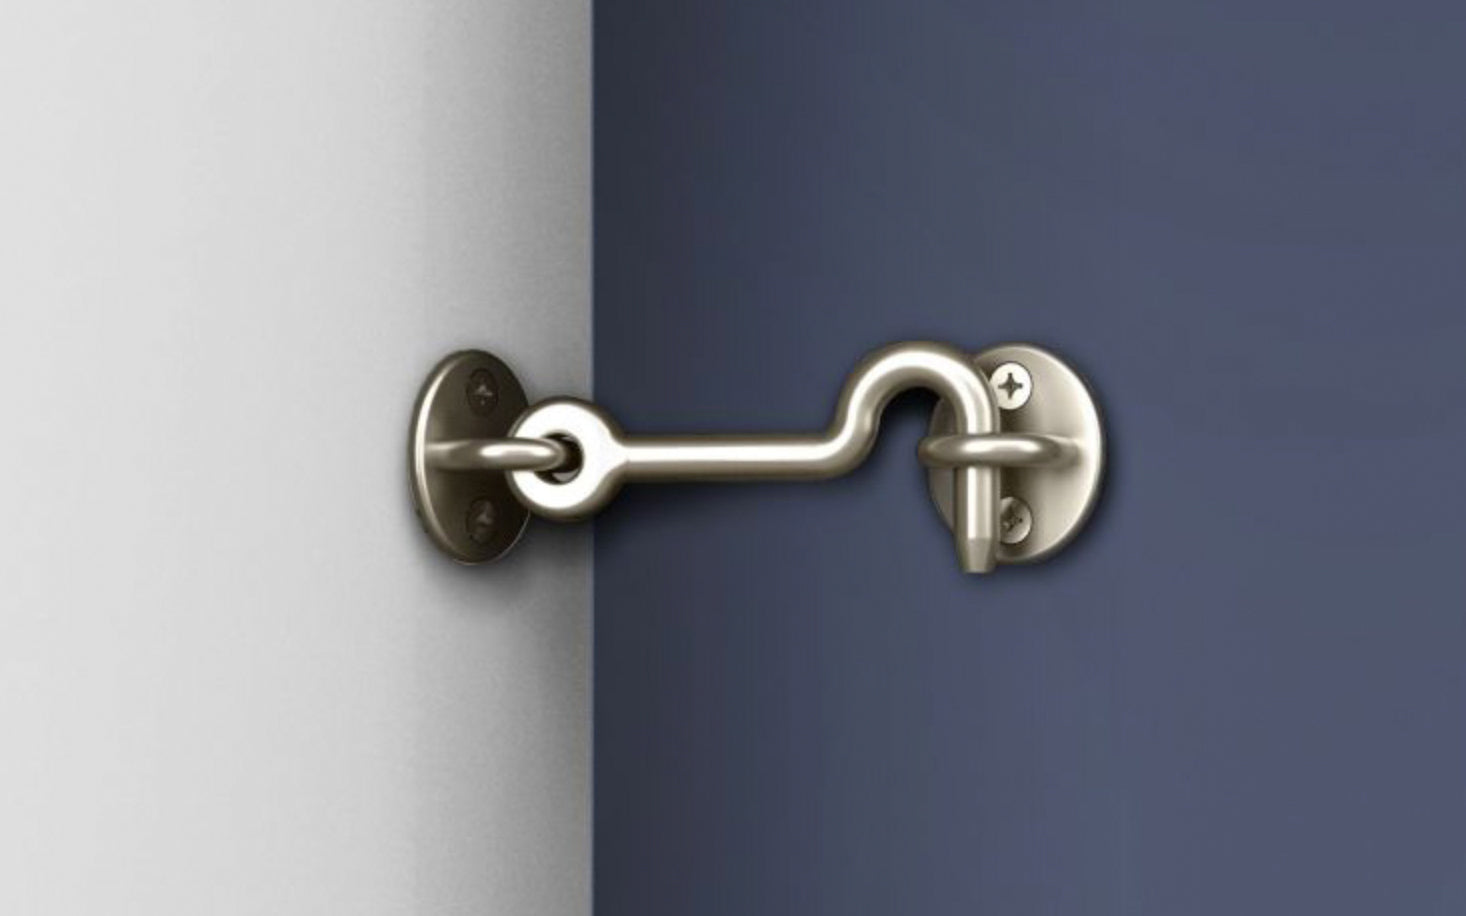 4" Satin Nickel Privacy Hook. Designed for interior barn door hardware. privacy hook. Adds a privacy function to any sliding door hardware door. Includes fasteners. Sold as a single hook and pad. Includes four flat head phillips screws. National Hardware model N187-036. 886780018981